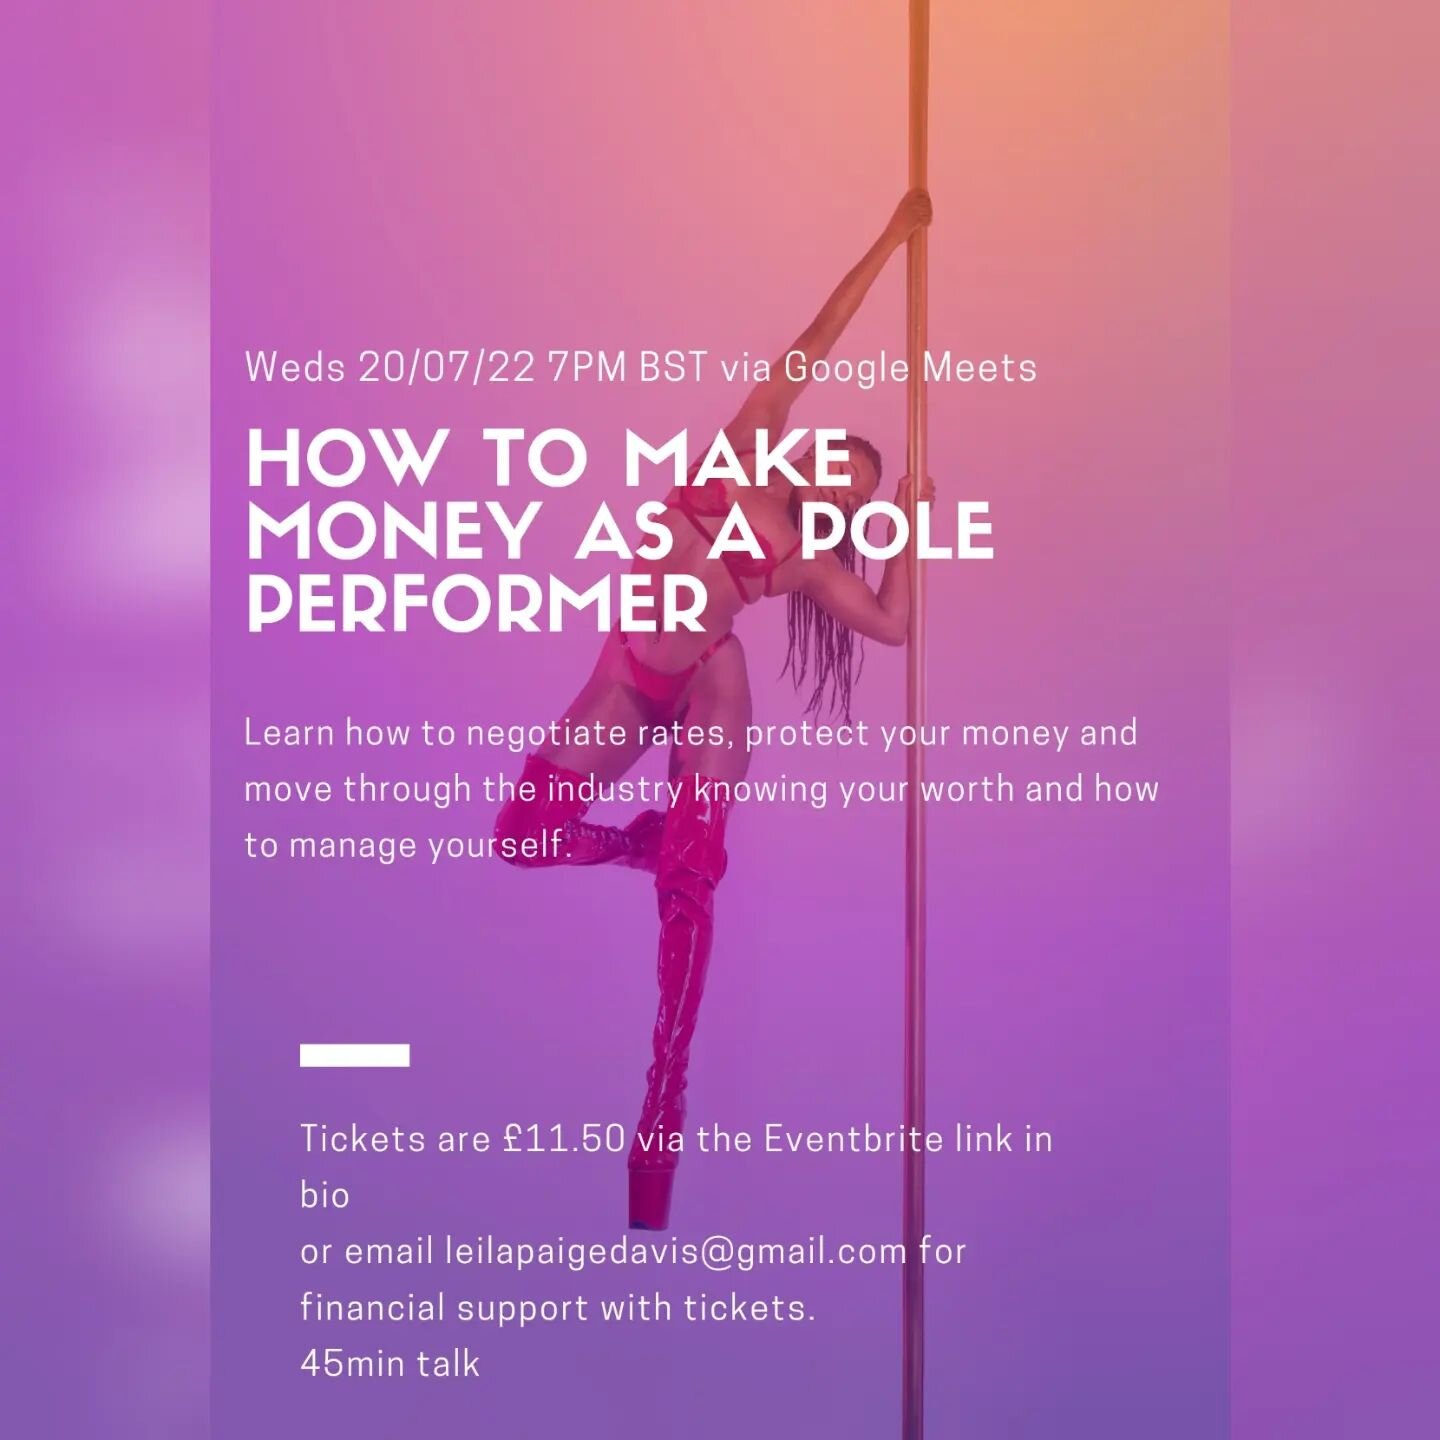 Back by popular demand!
Tickets for the fourth 'How to make money as a pole performer' talk are now live! Follow the linktree to book.
This time the talk is on Google meets and I highly recommend it for those who are considering a career in freelance